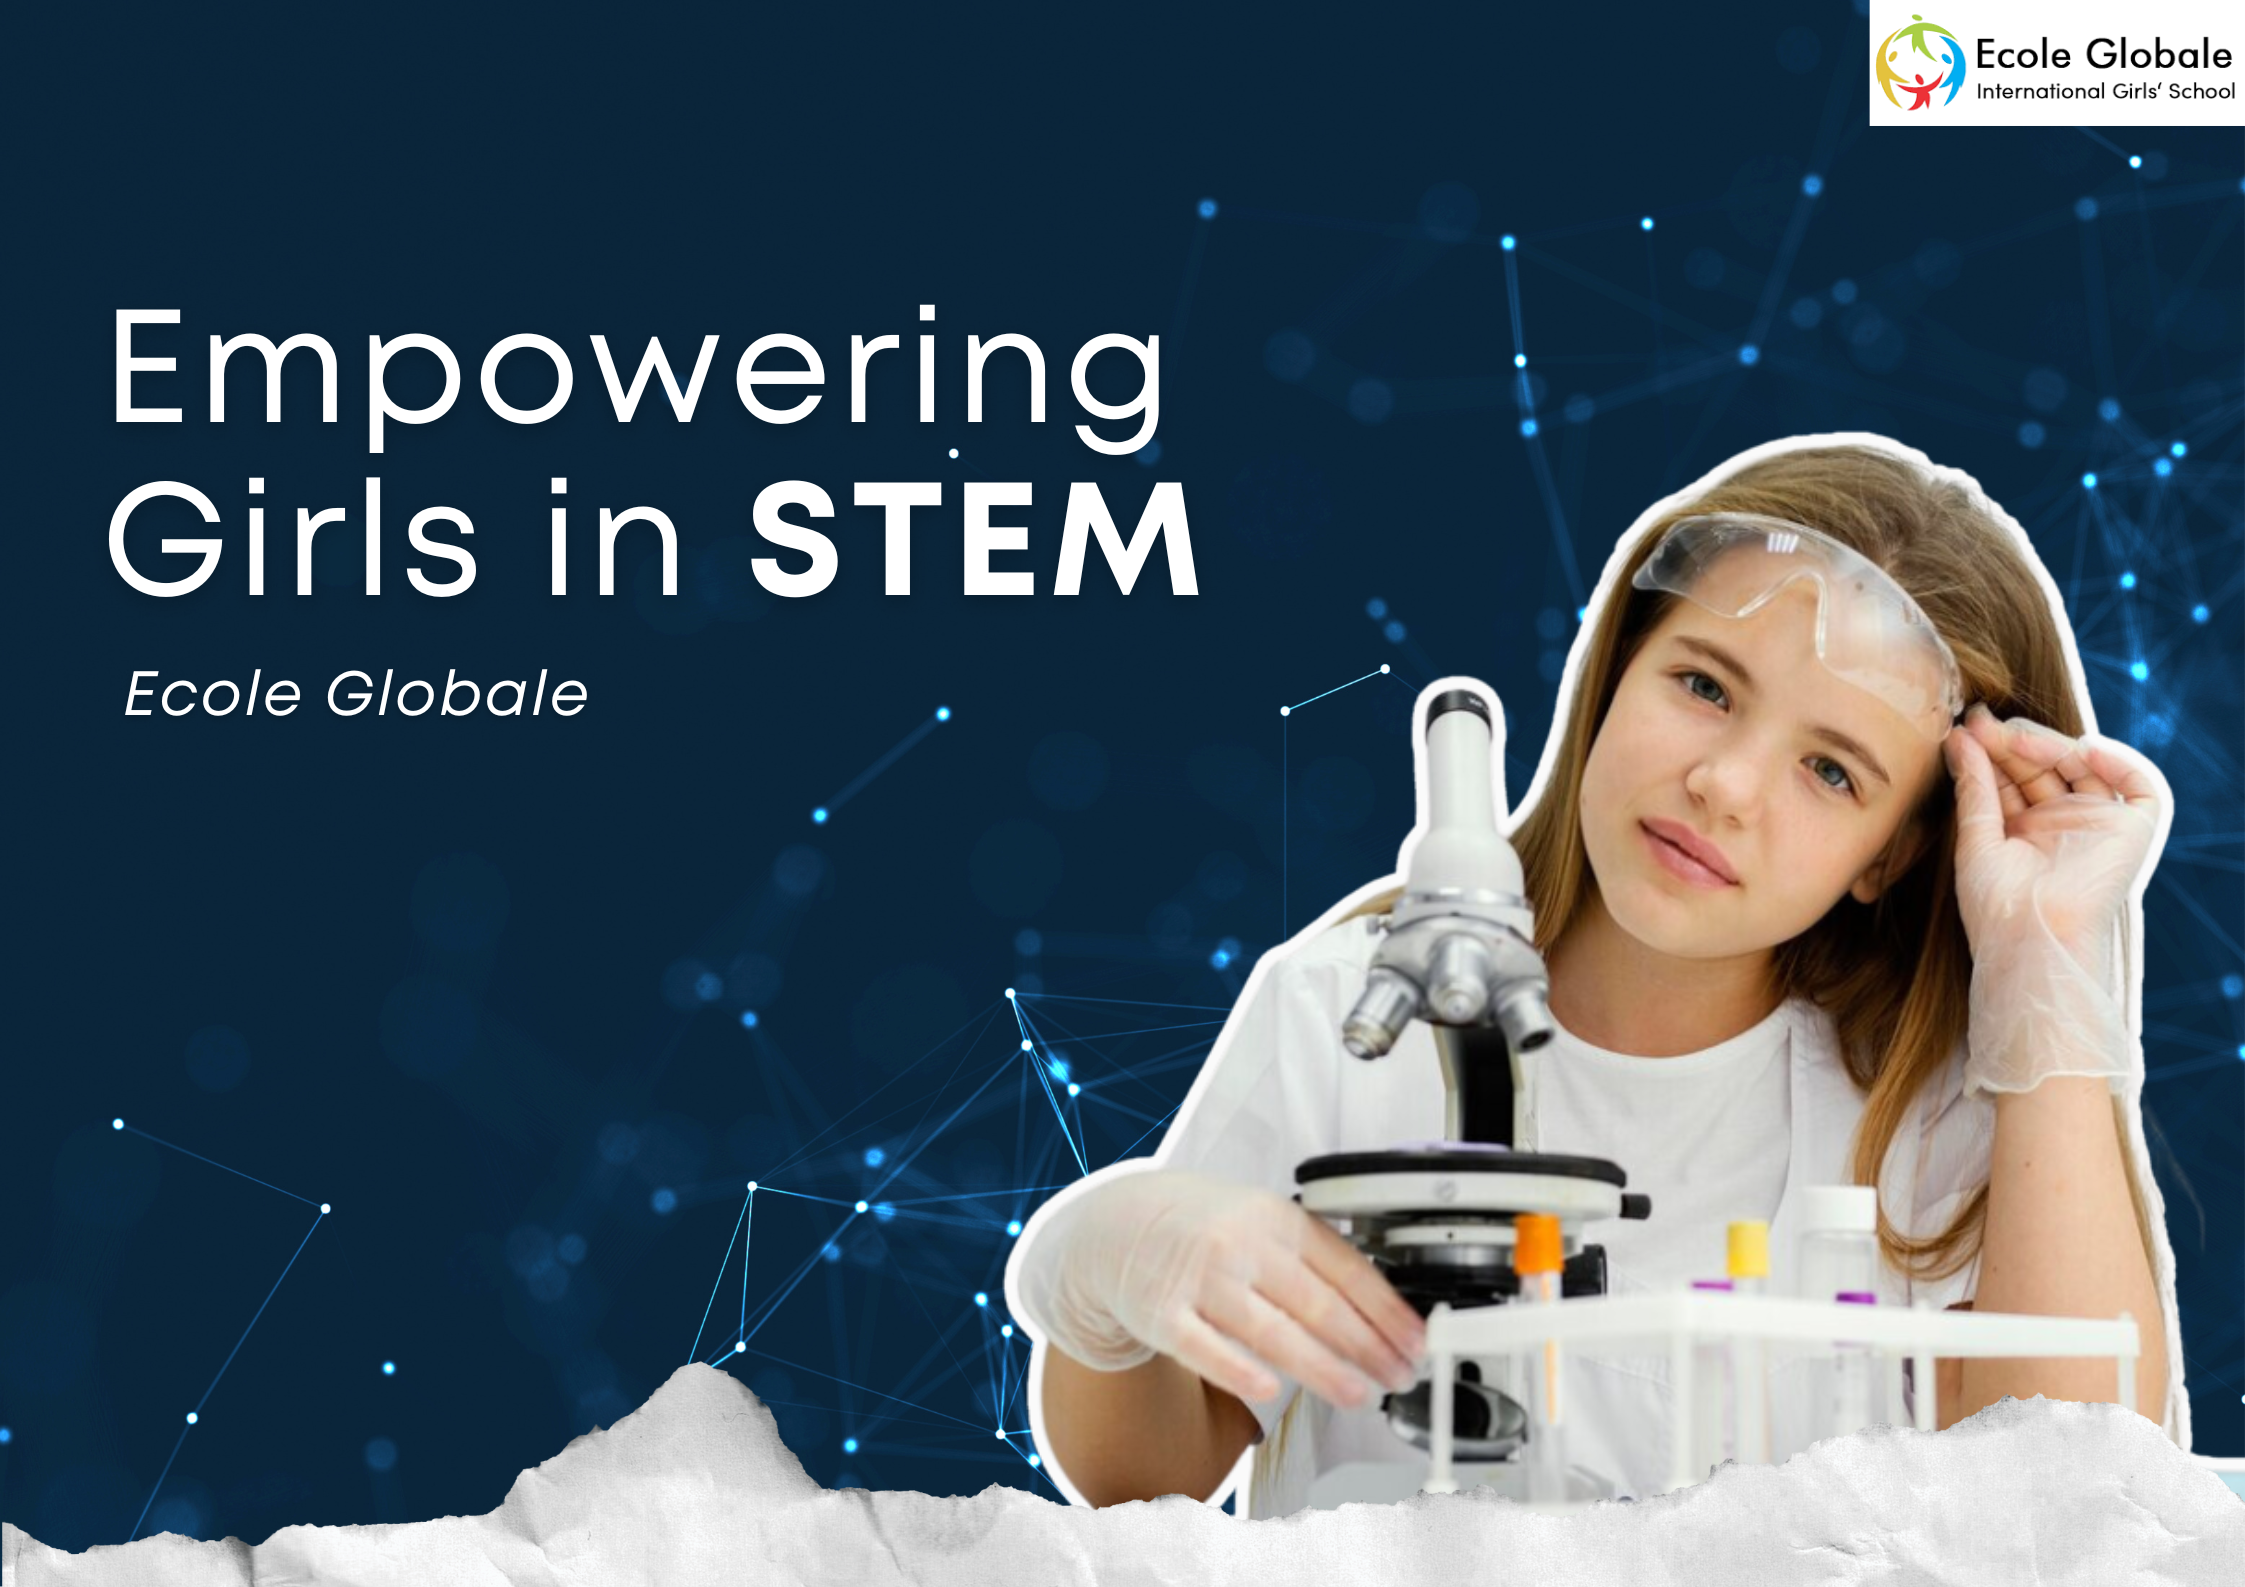 You are currently viewing Empowering Girls in STEM: The Ecole Globale Approach